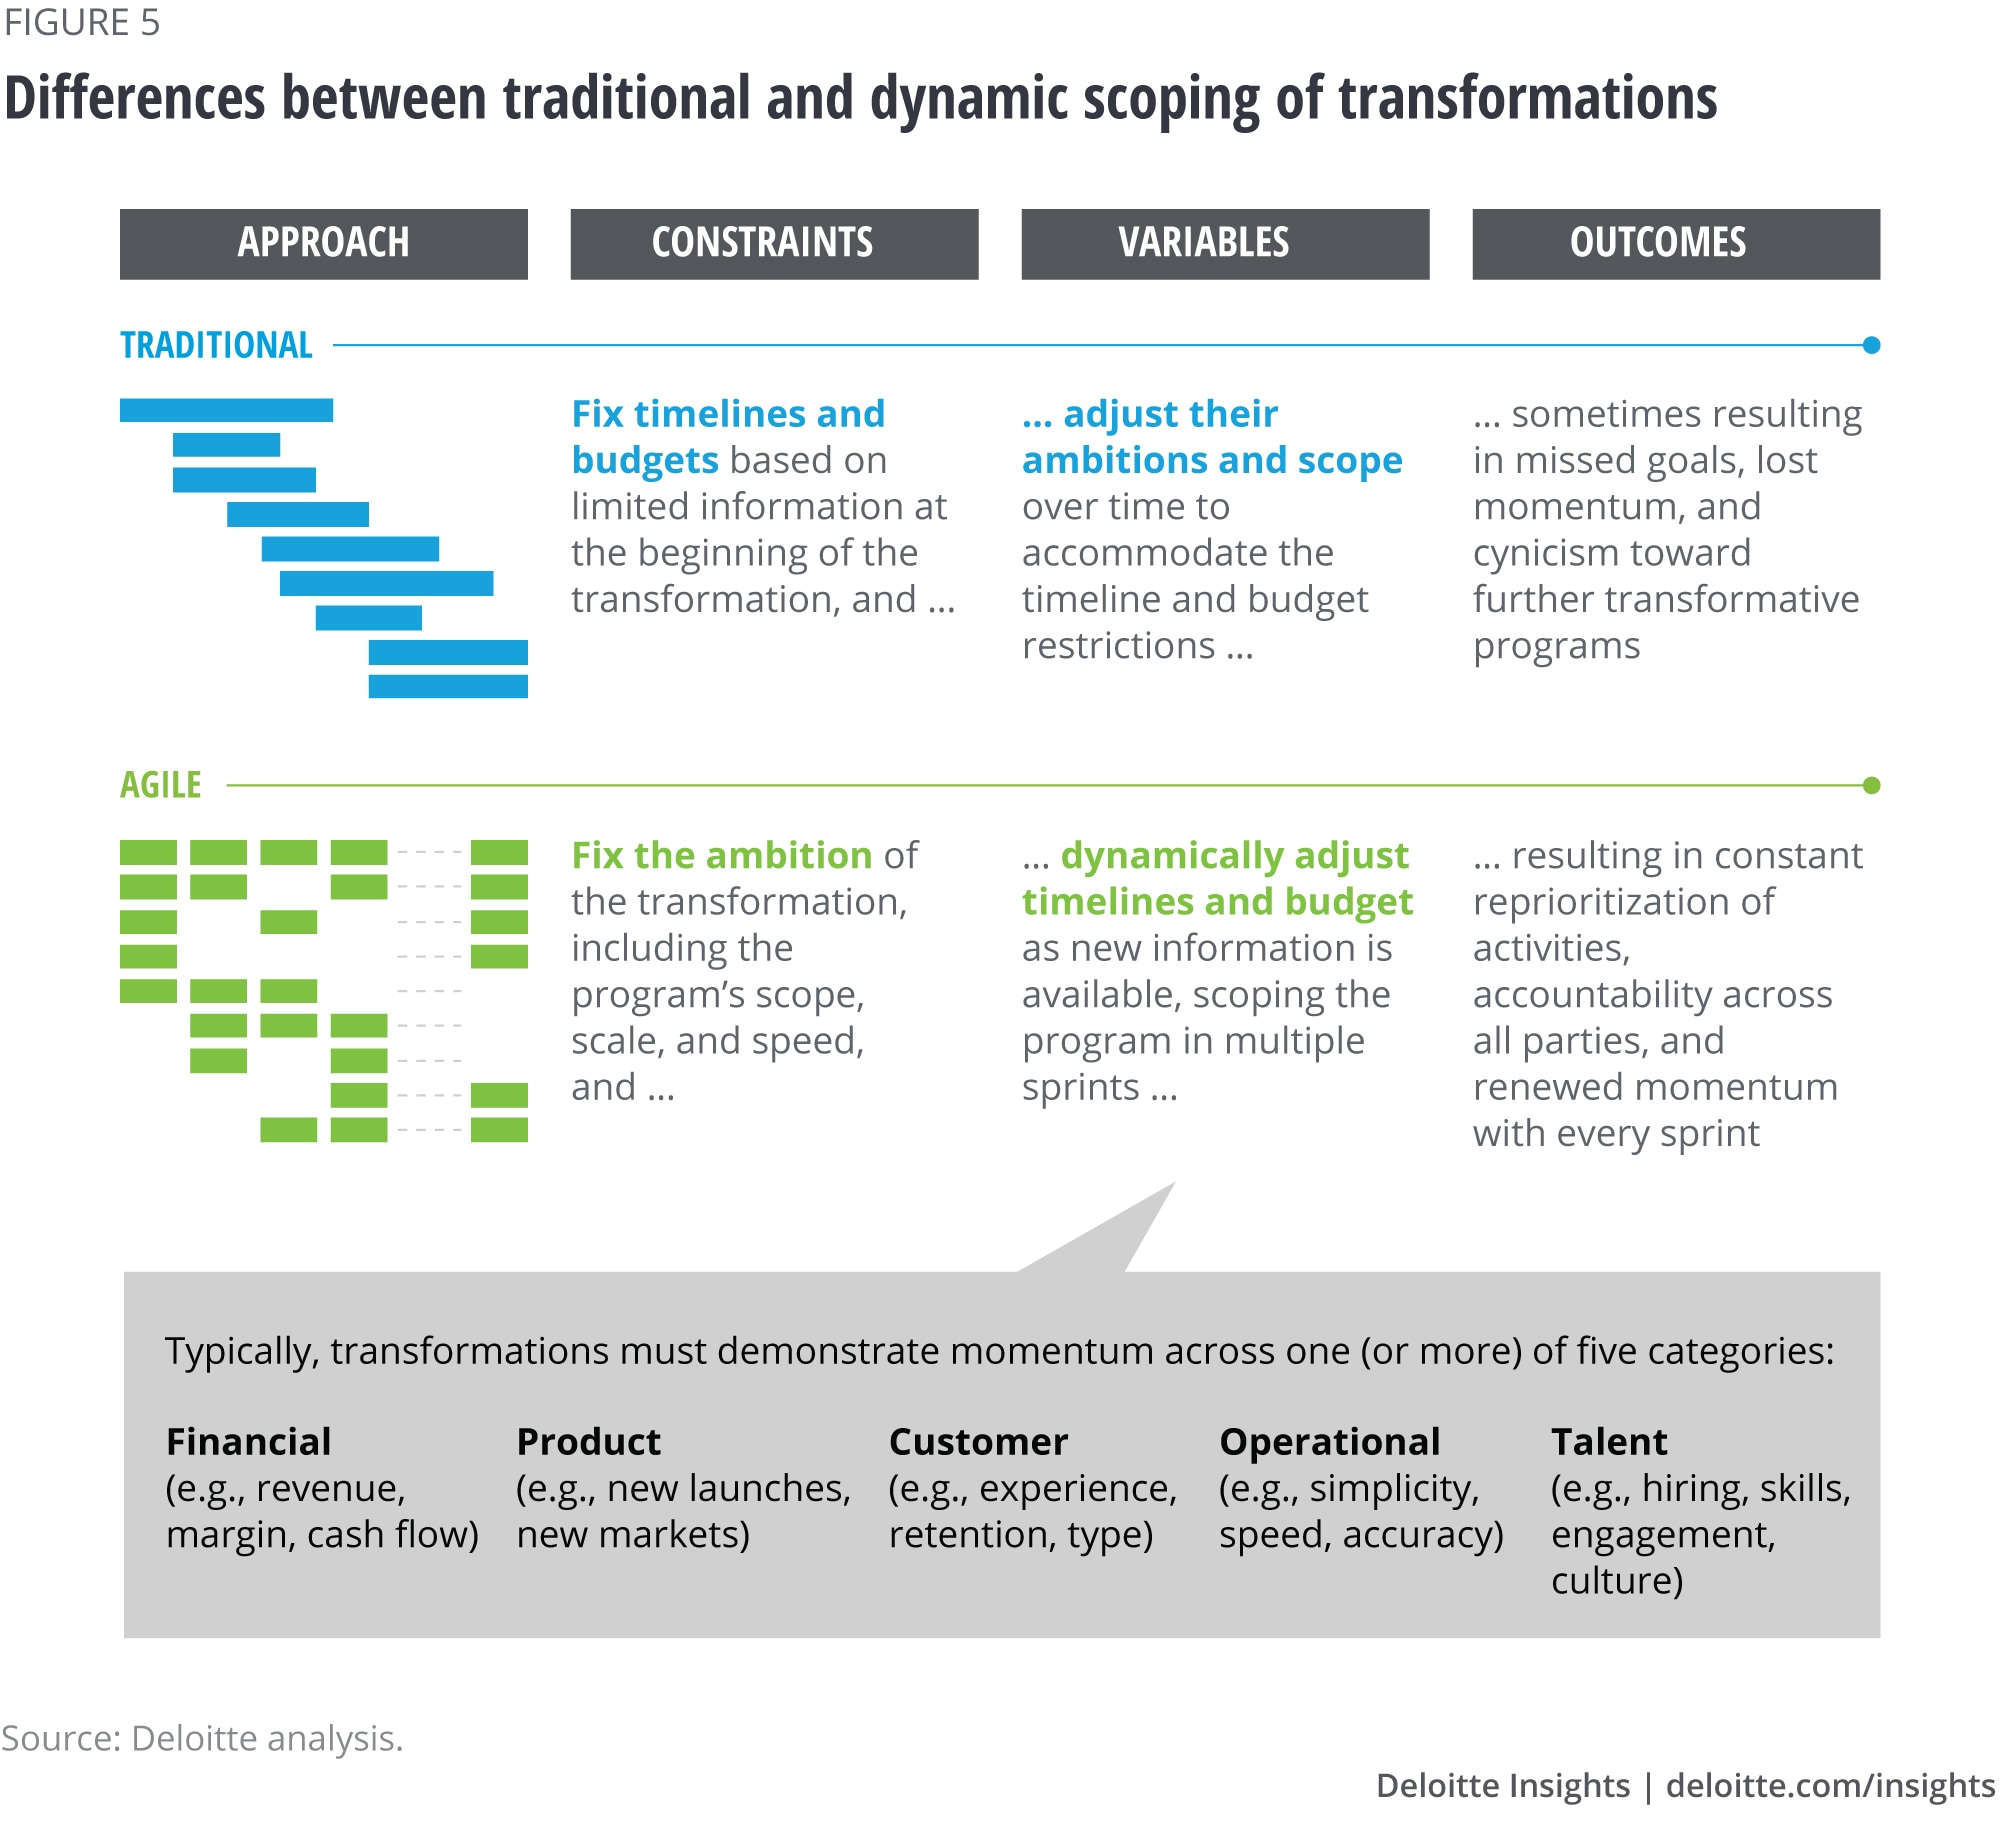 Differences between traditional and dynamic scoping of transformations